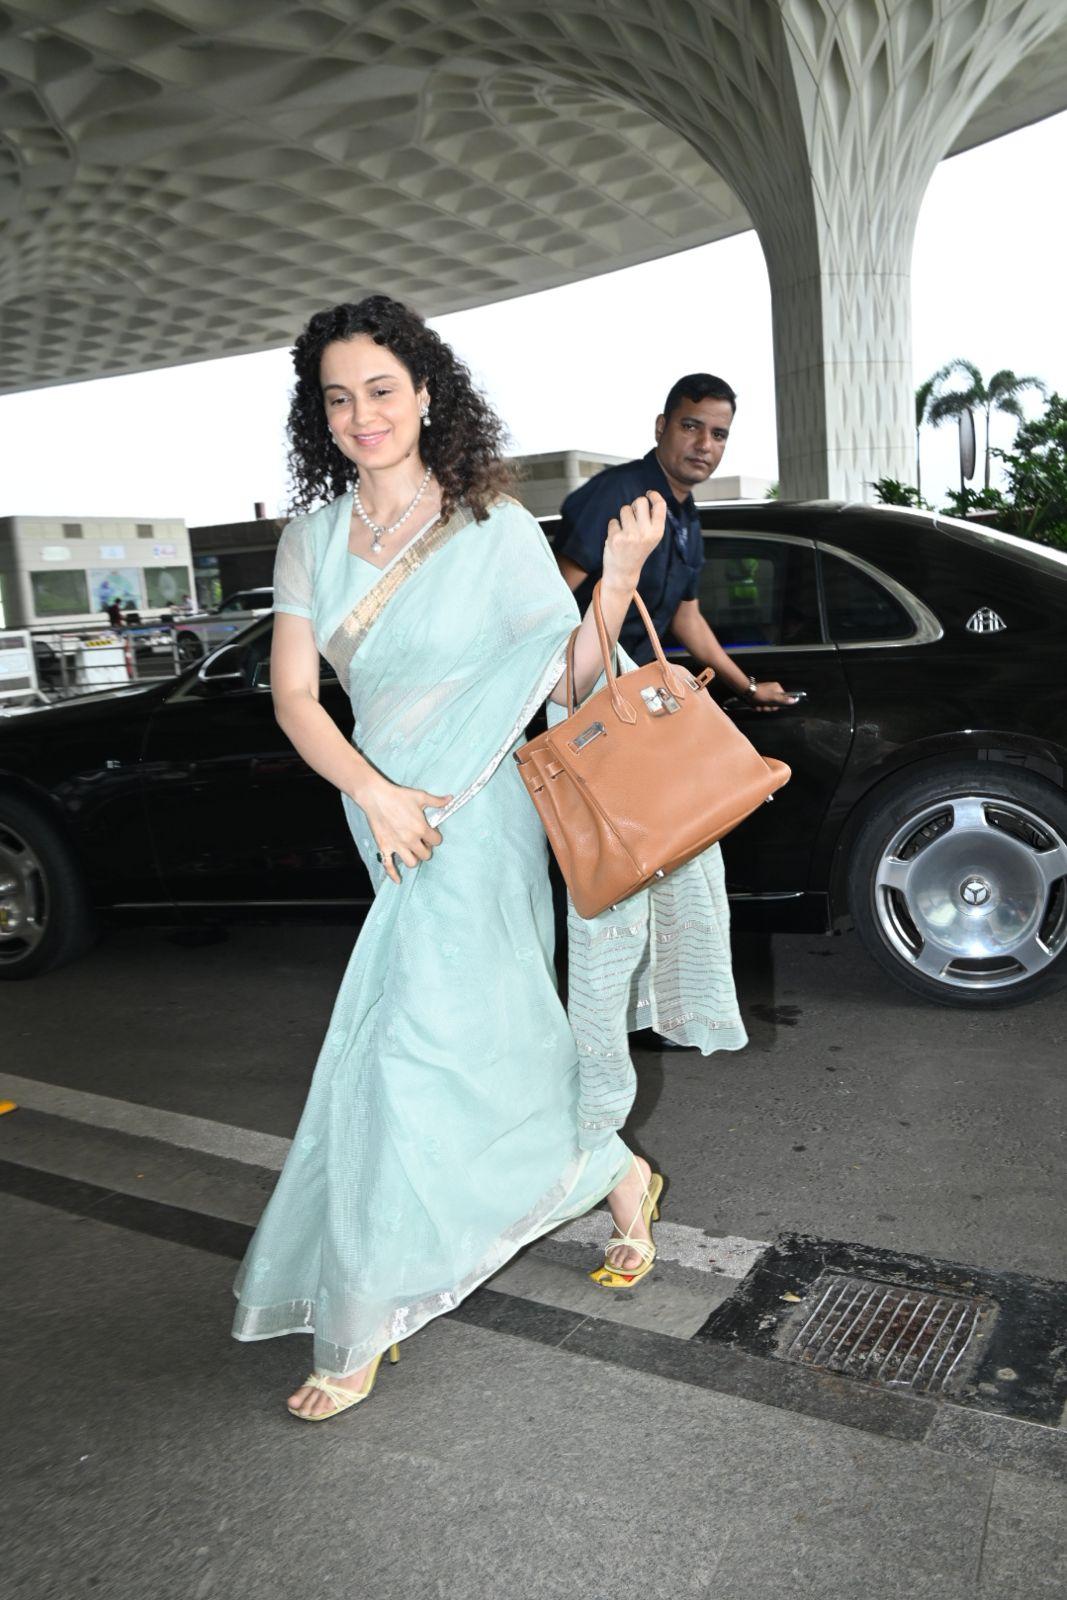 The saree gracefully draped around her, accentuating her poise and style.